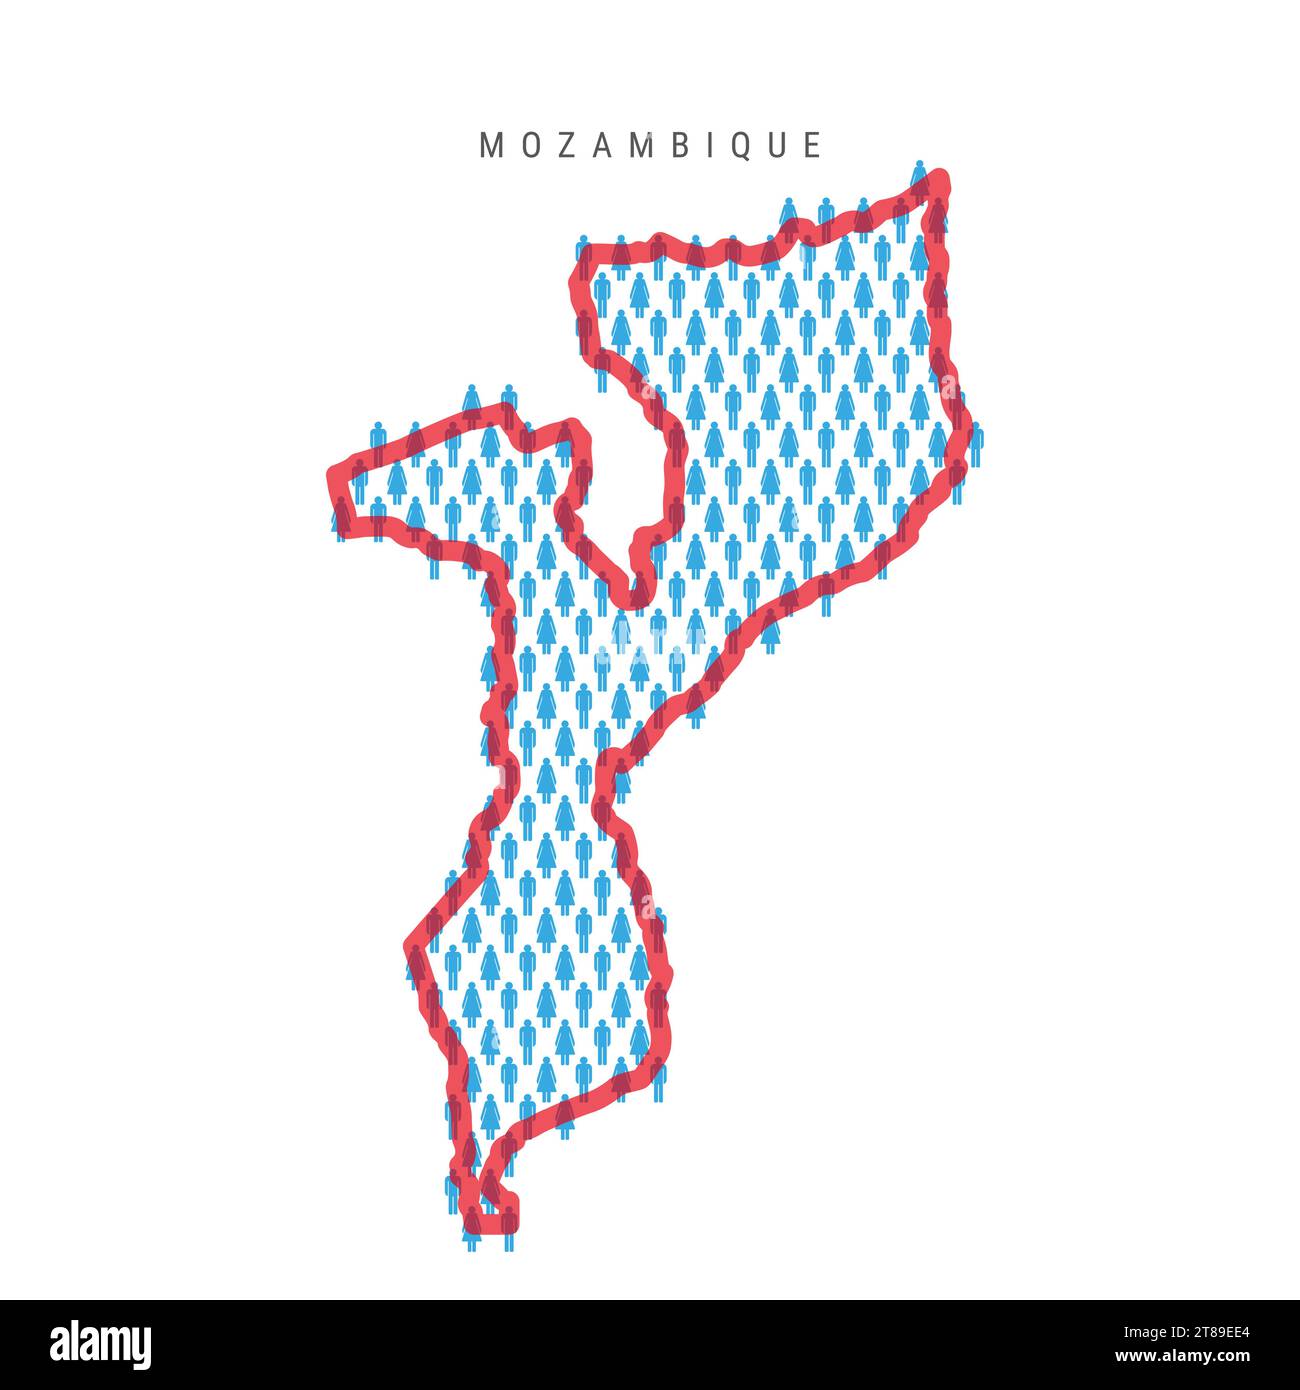 Mozambique population map. Stick figures Mozambican people map with bold red translucent country border. Pattern of men and women icons. Isolated vect Stock Vector